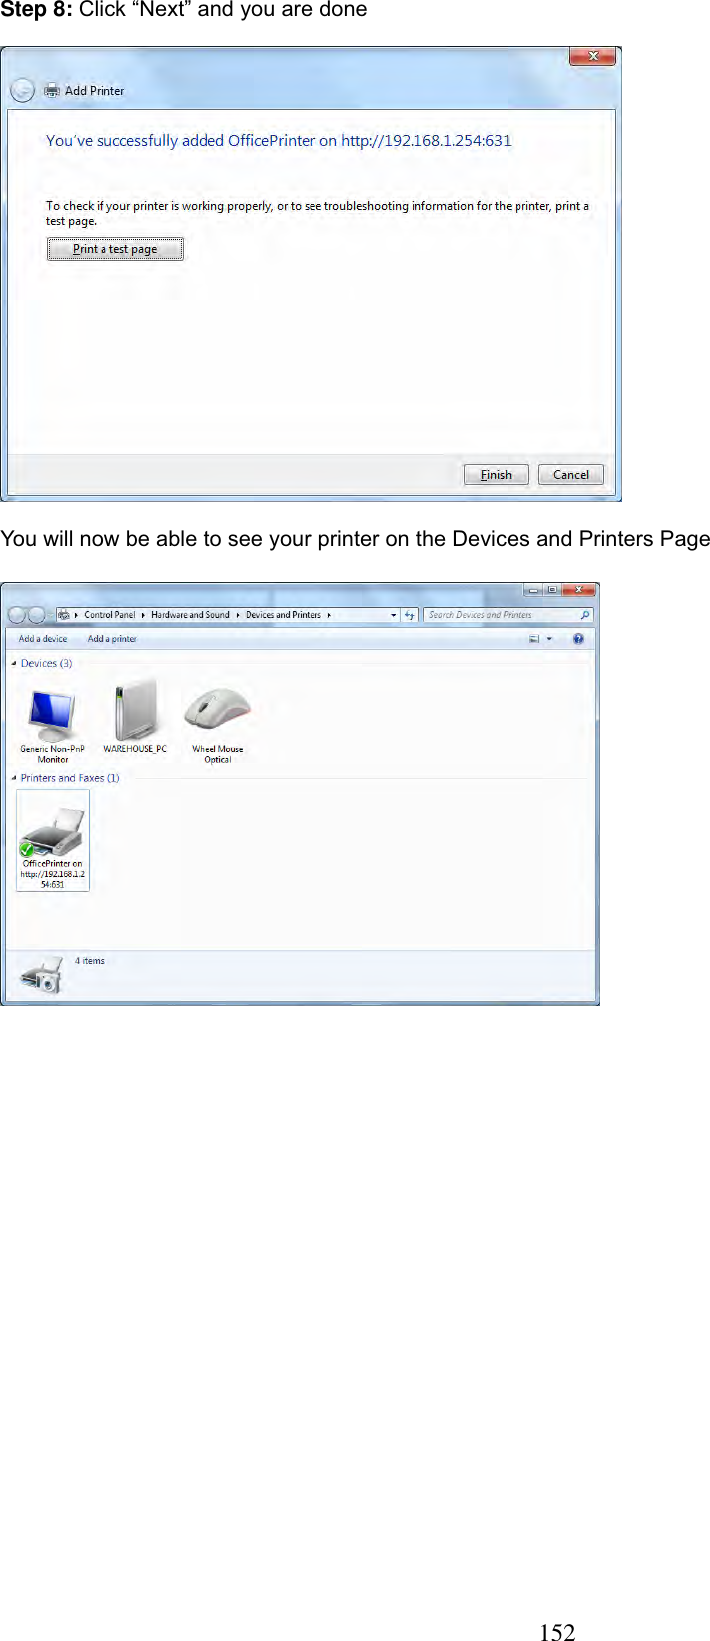 152Step 8: Click “Next” and you are done You will now be able to see your printer on the Devices and Printers Page 